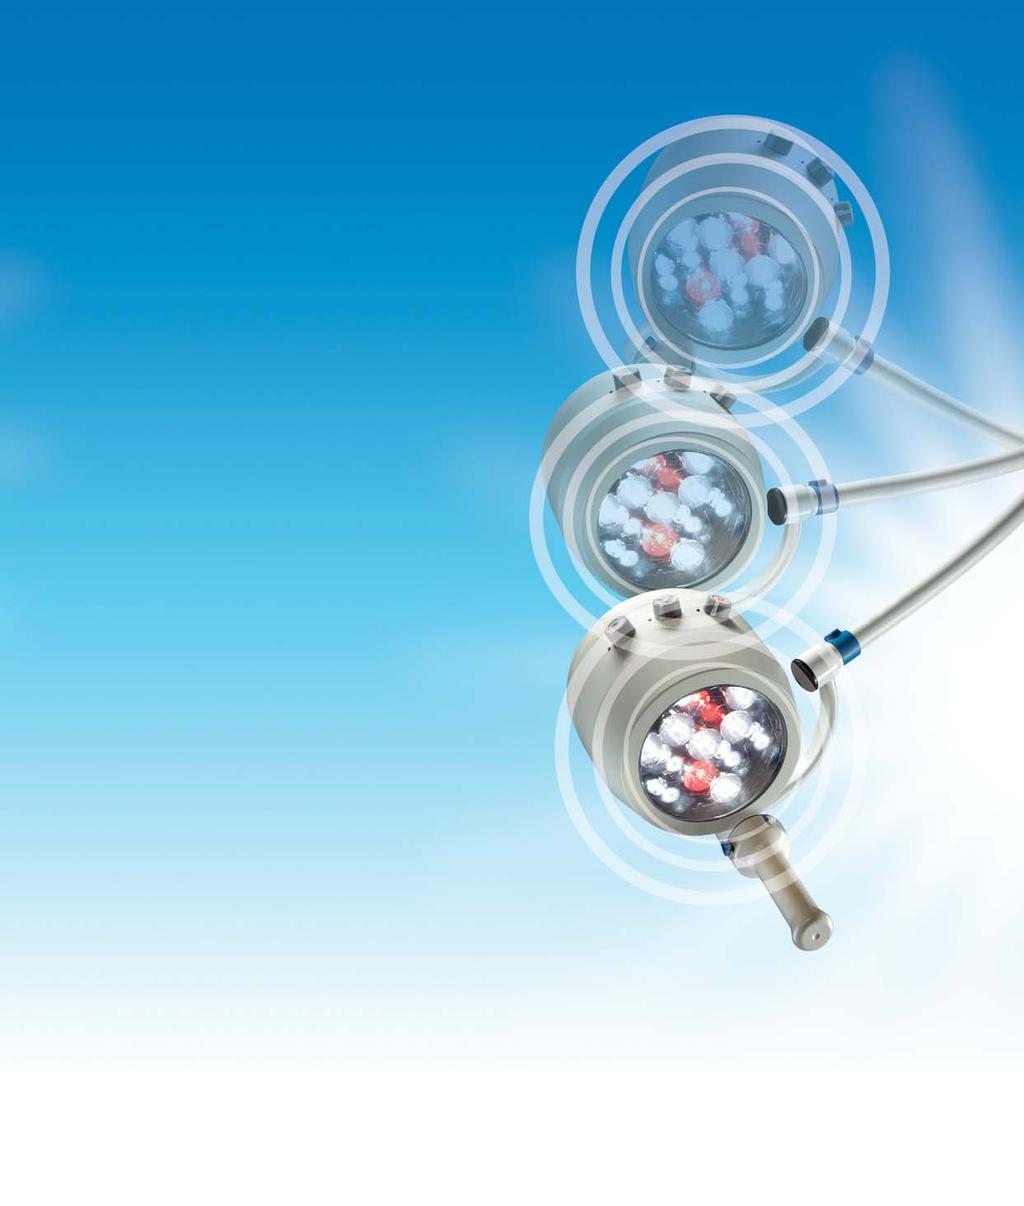 Astralite HD-LED Minor Surgical